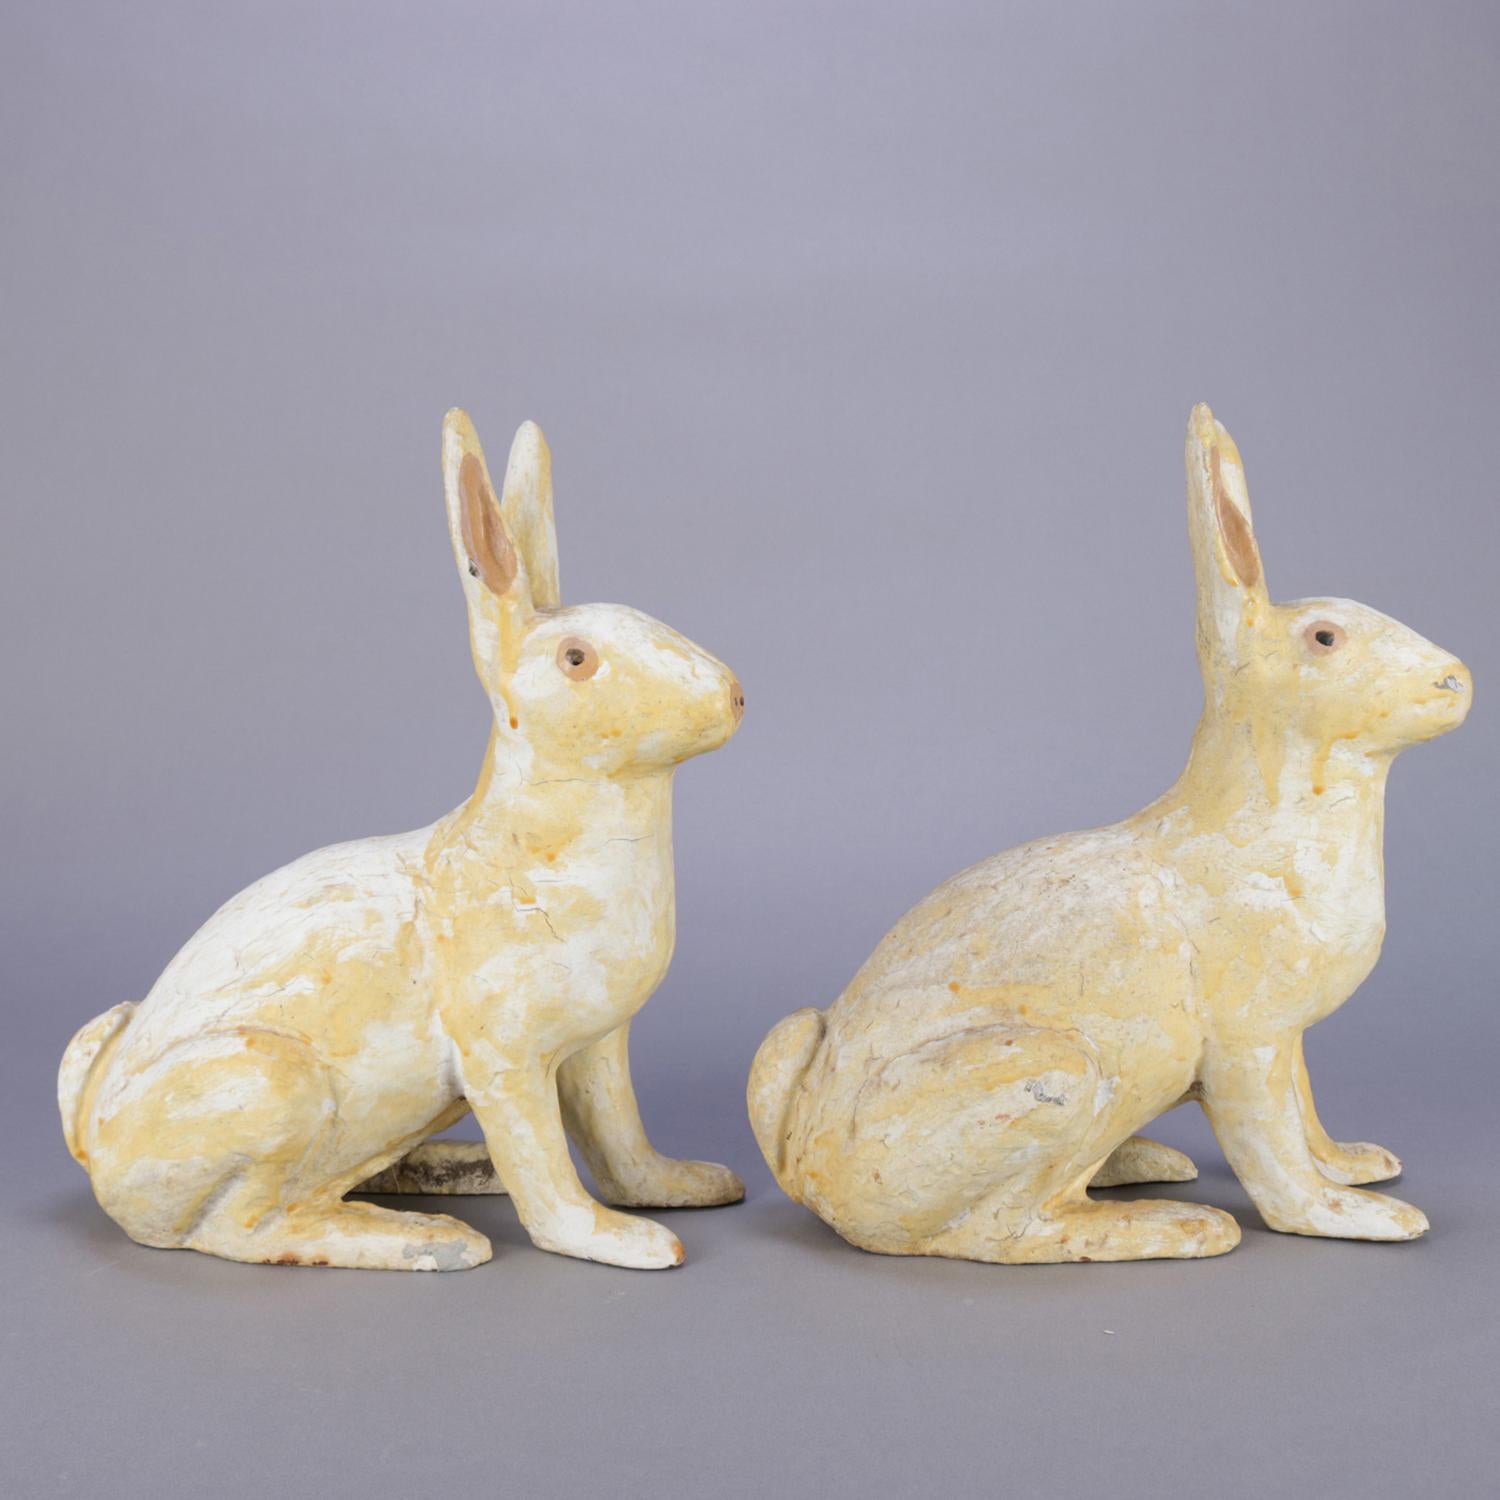 A pair of large and antique figural doorstops feature painted sculptural cast iron seated white rabbits, reminiscent of Easter bunnies (bunny), circa 1890.

Measures: 12